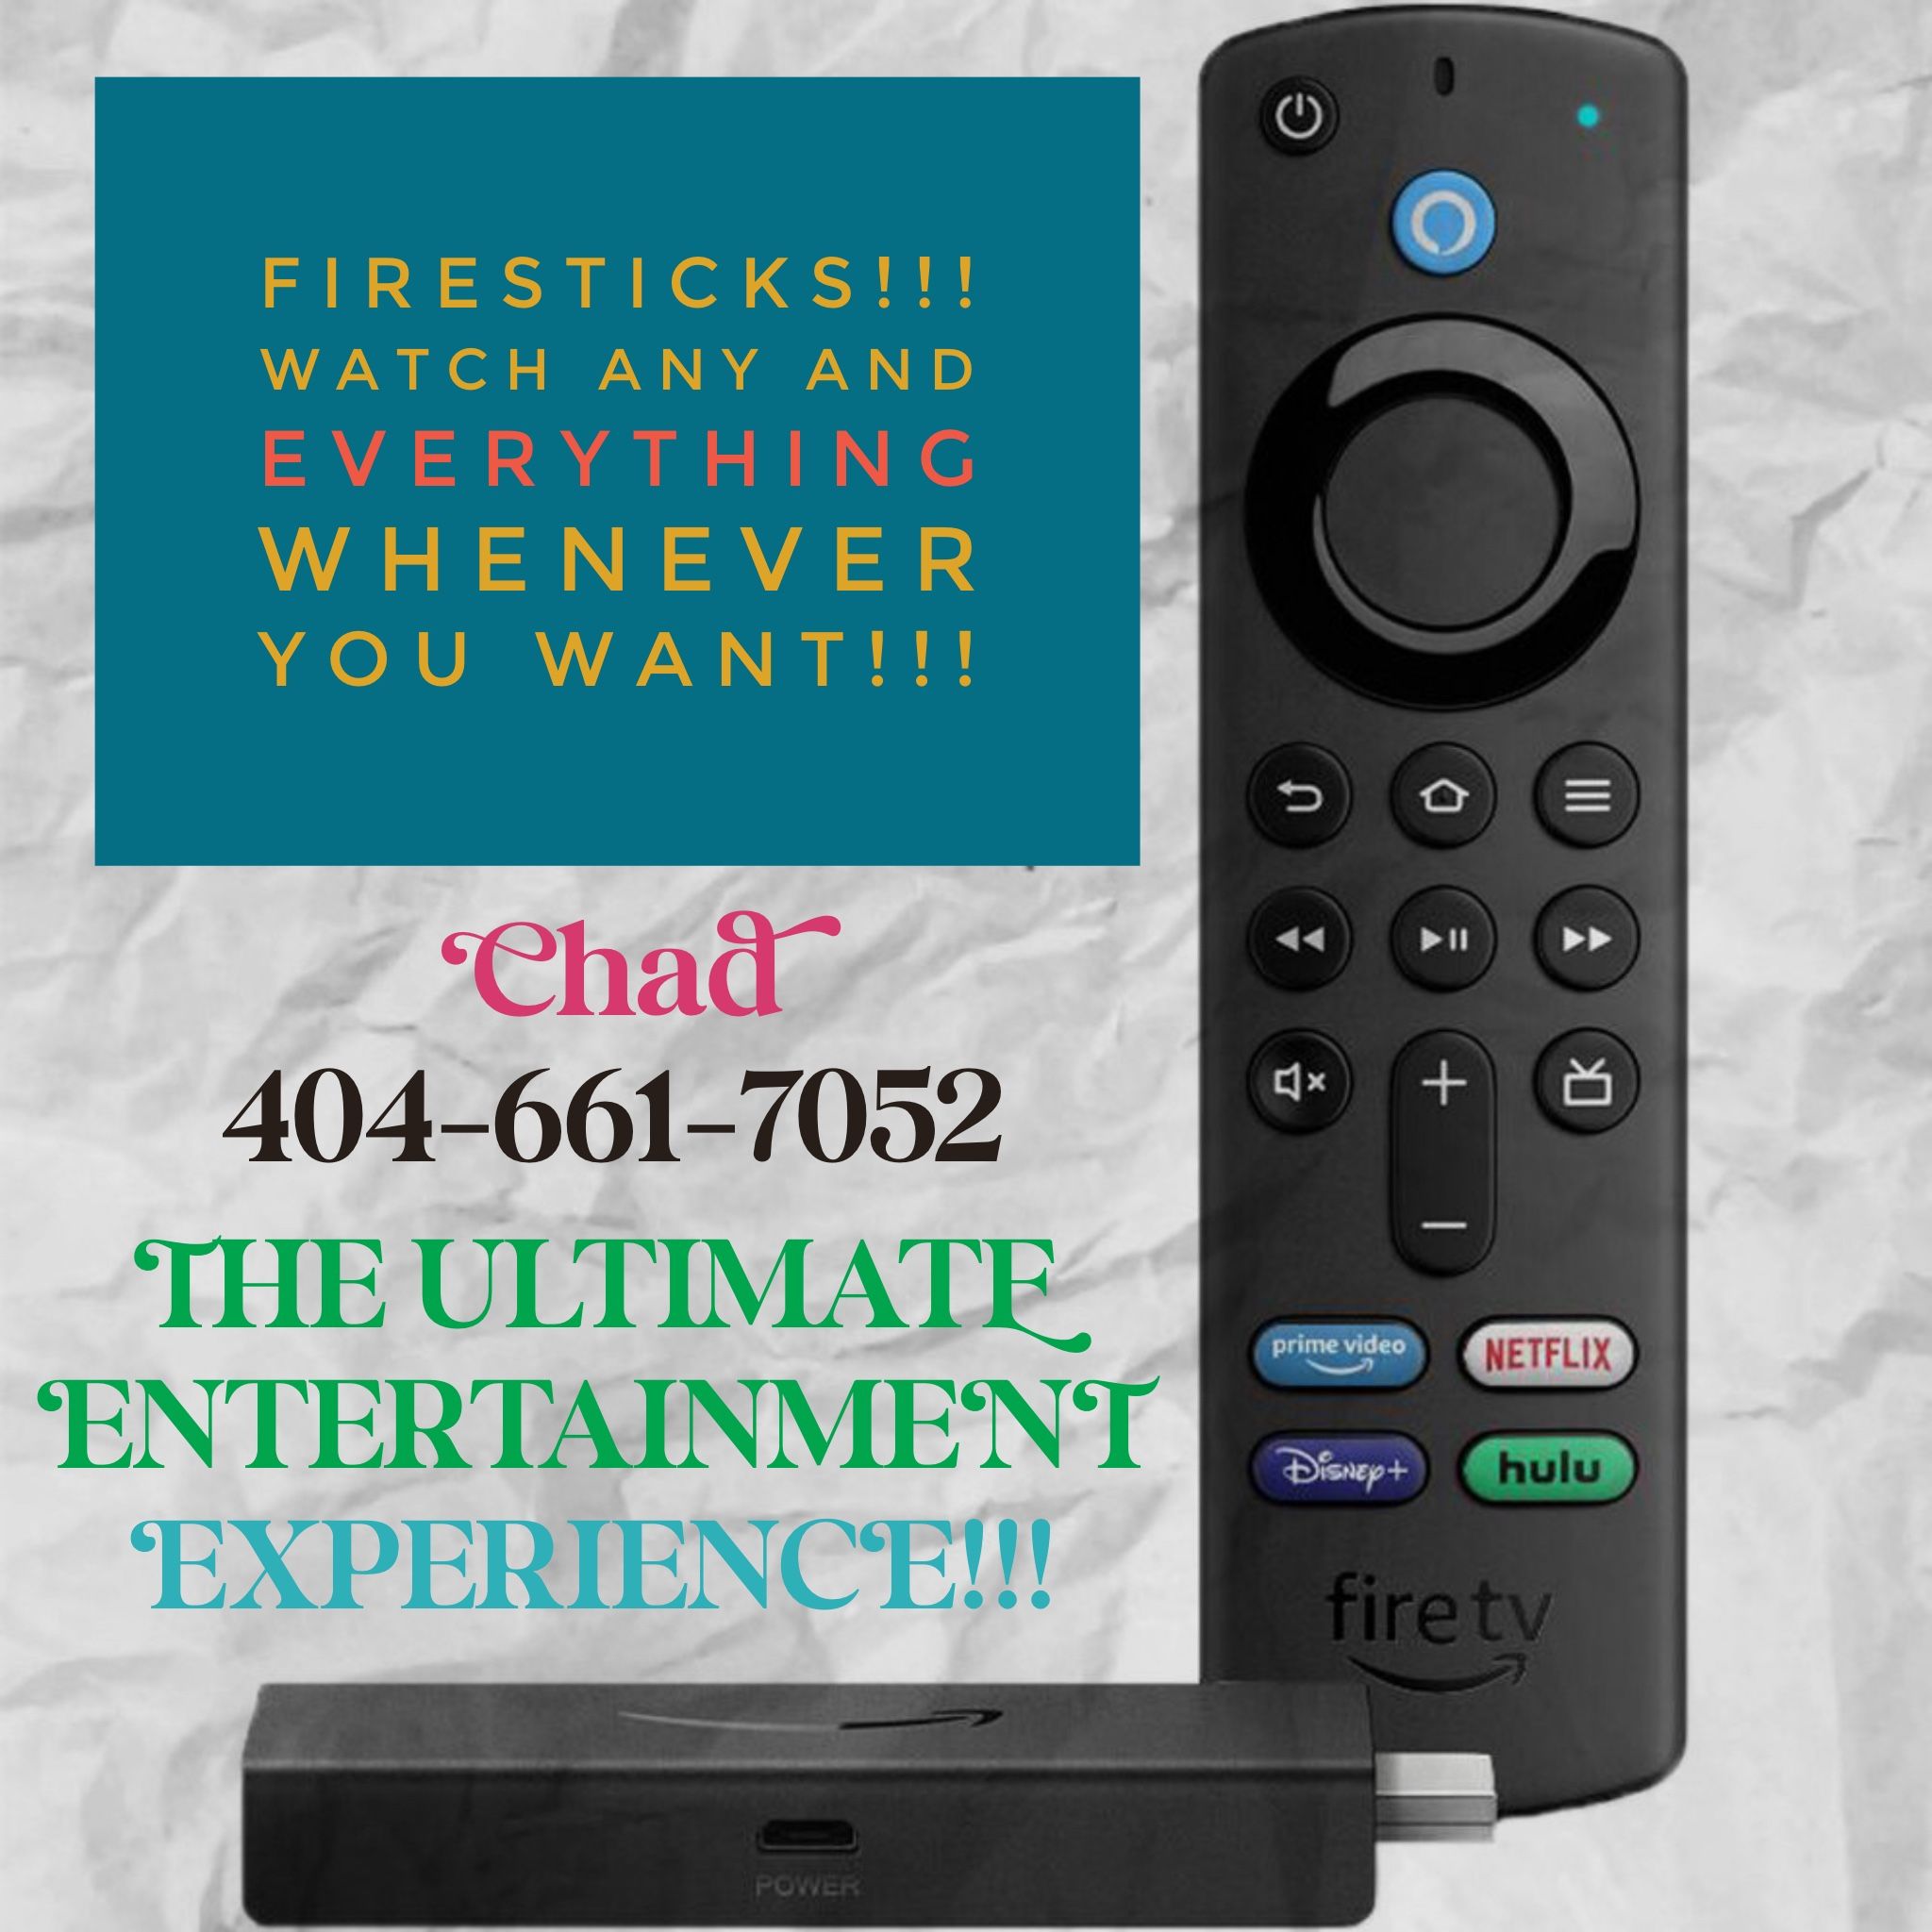 The Best Of The Best in Entertainment! Watch Any And Everything Whenever You Want! You’ll Love These Devices!